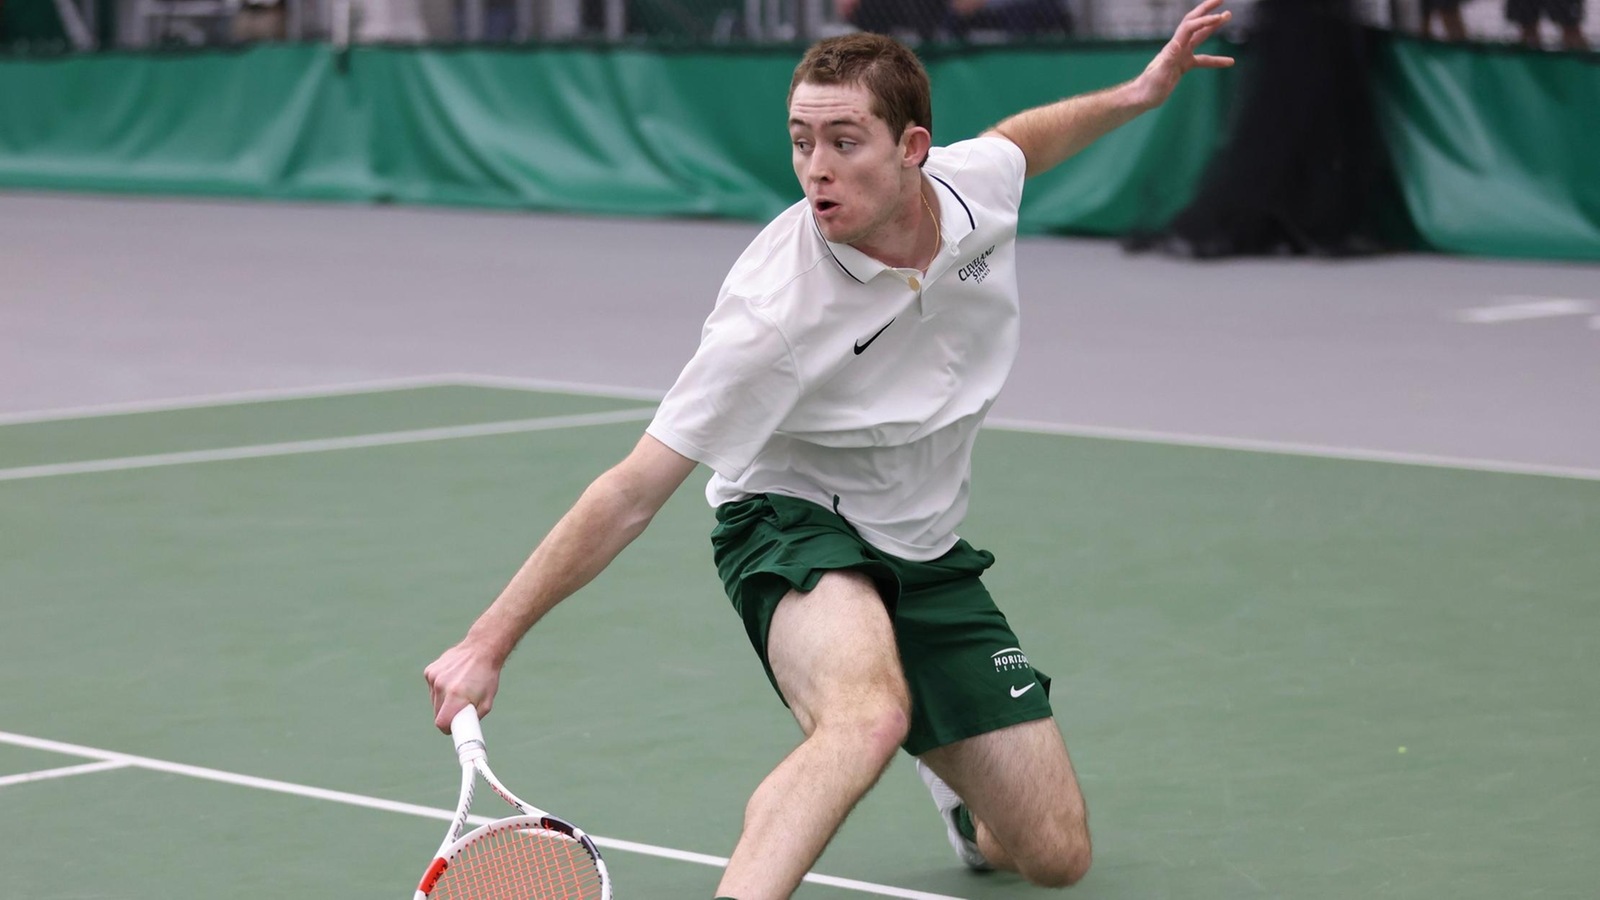 Cleveland State Men’s Tennis Remains Perfect In #HLTennis Play With 4-3 Win At Northern Kentucky